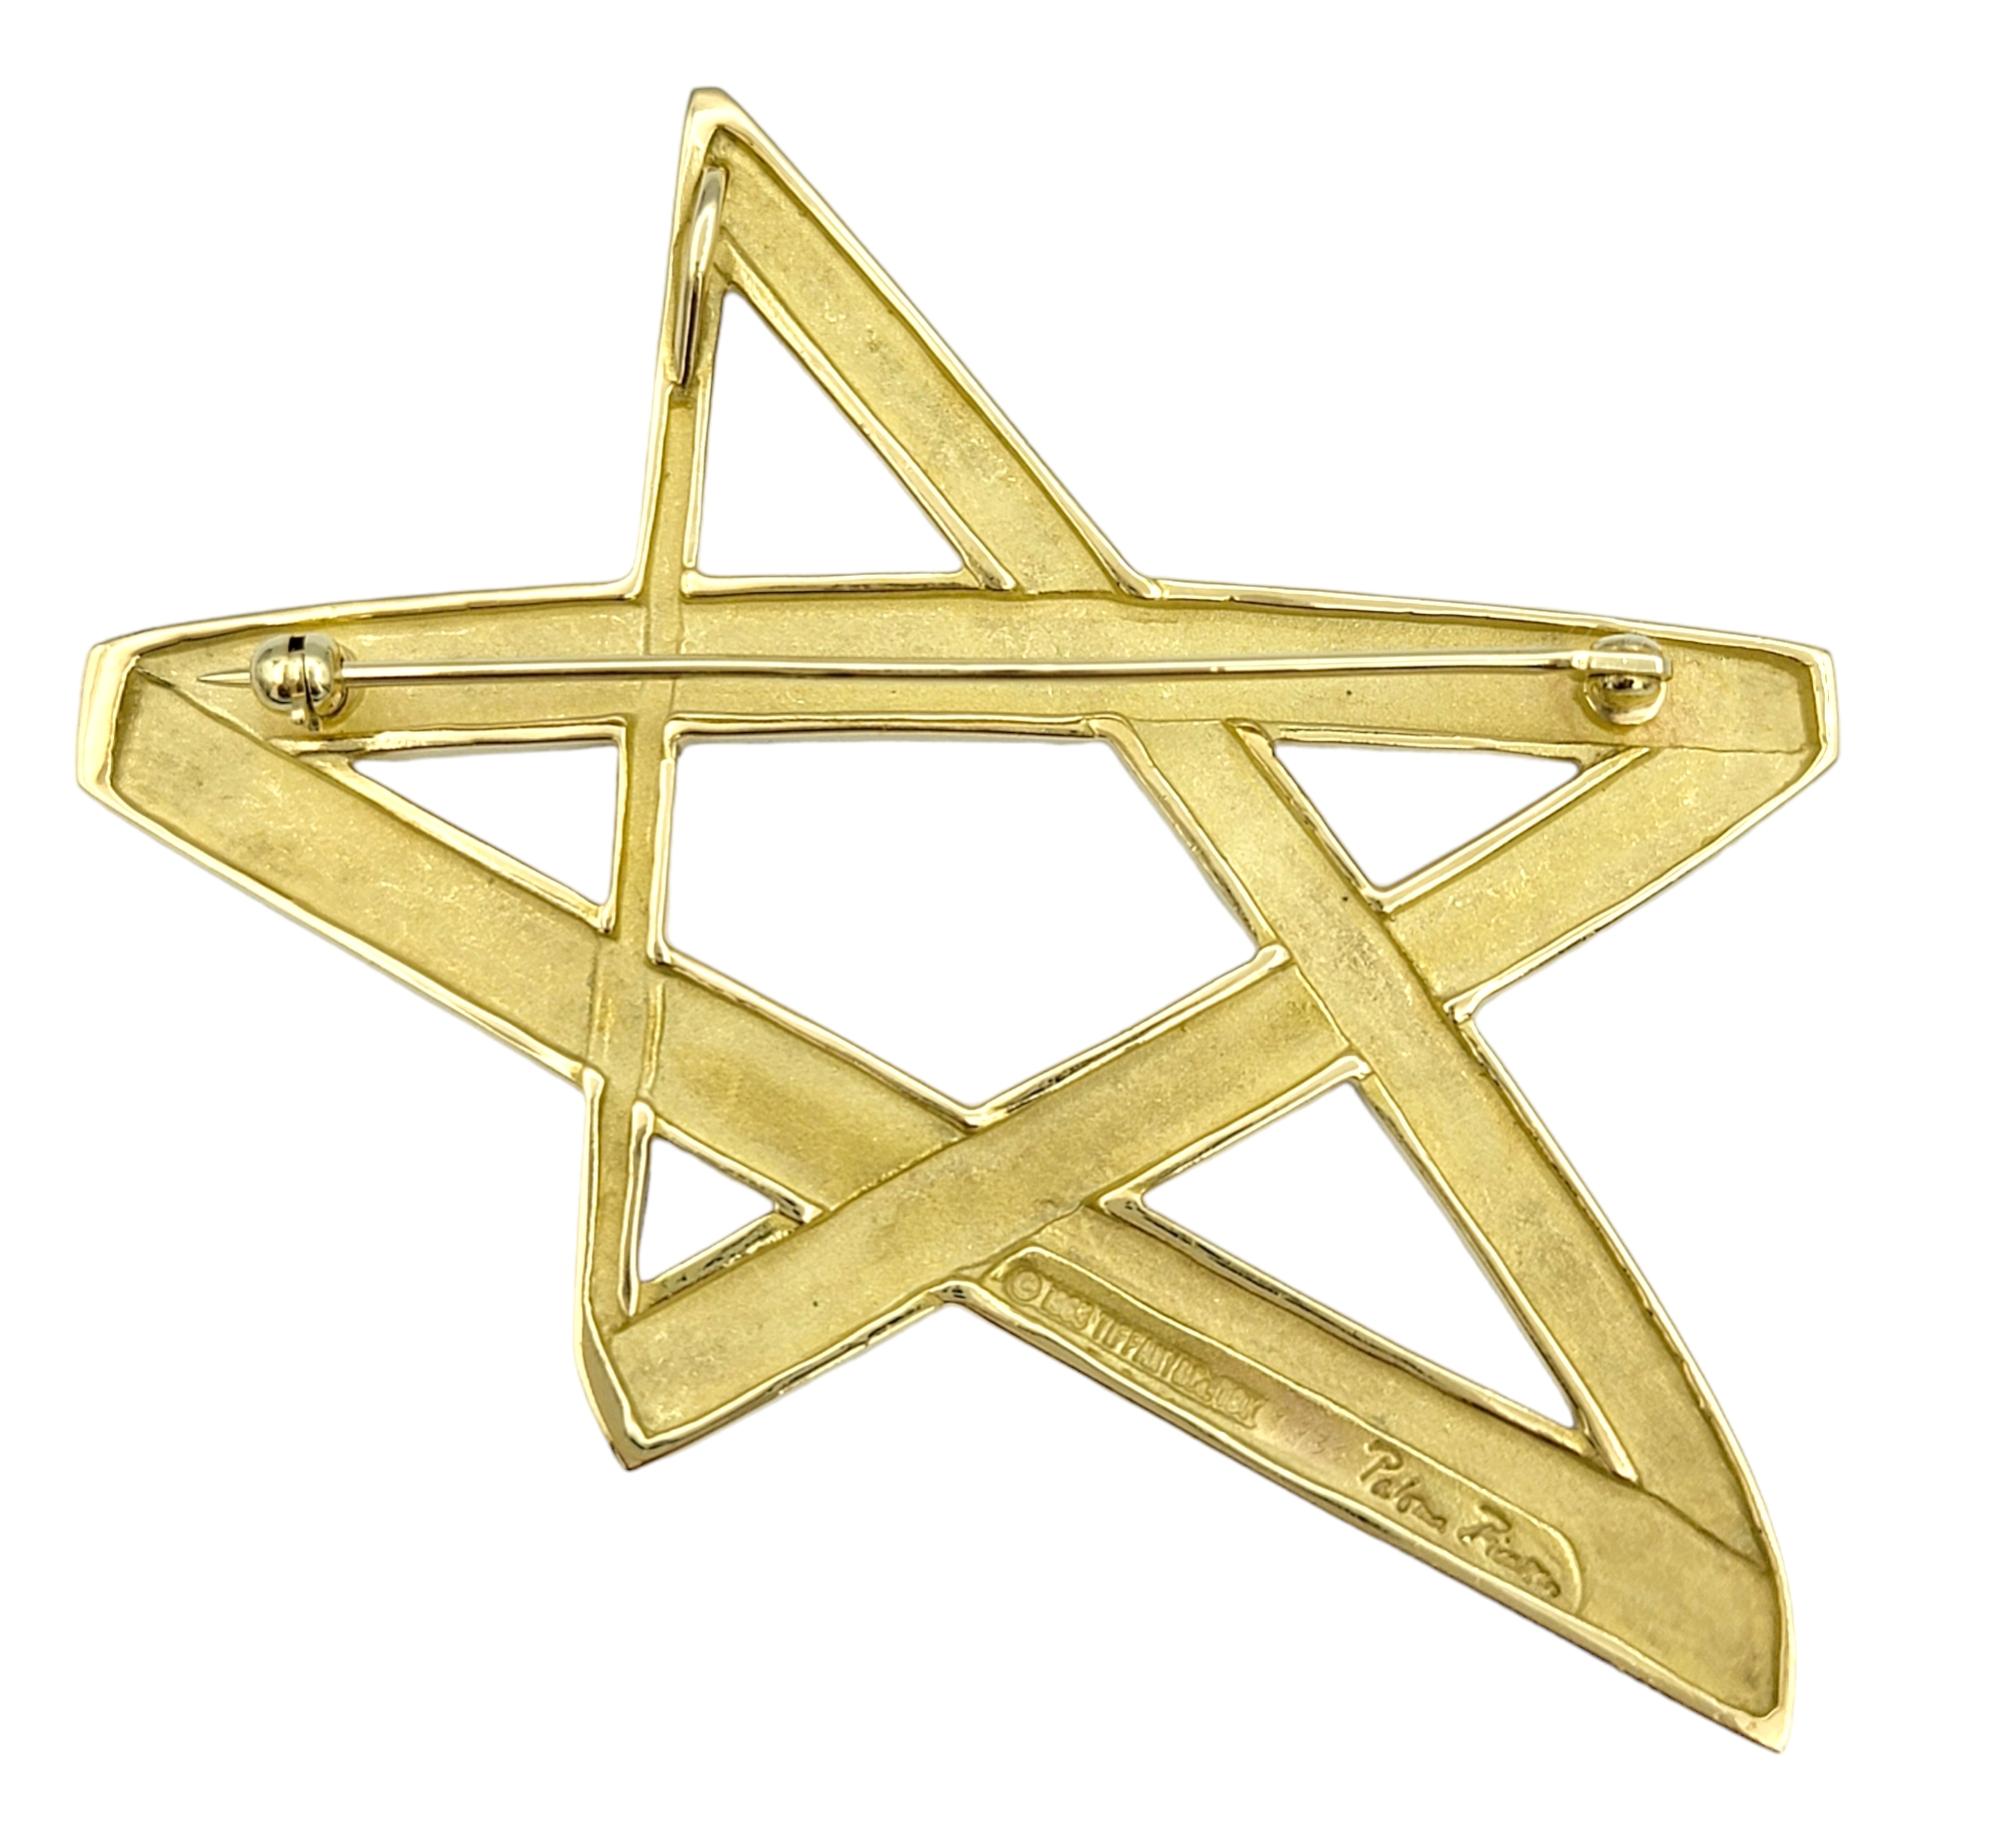 Tiffany & Co. Paloma Picasso Asymmetrical Star Brooch in 18 Karat Yellow Gold In Excellent Condition For Sale In Scottsdale, AZ